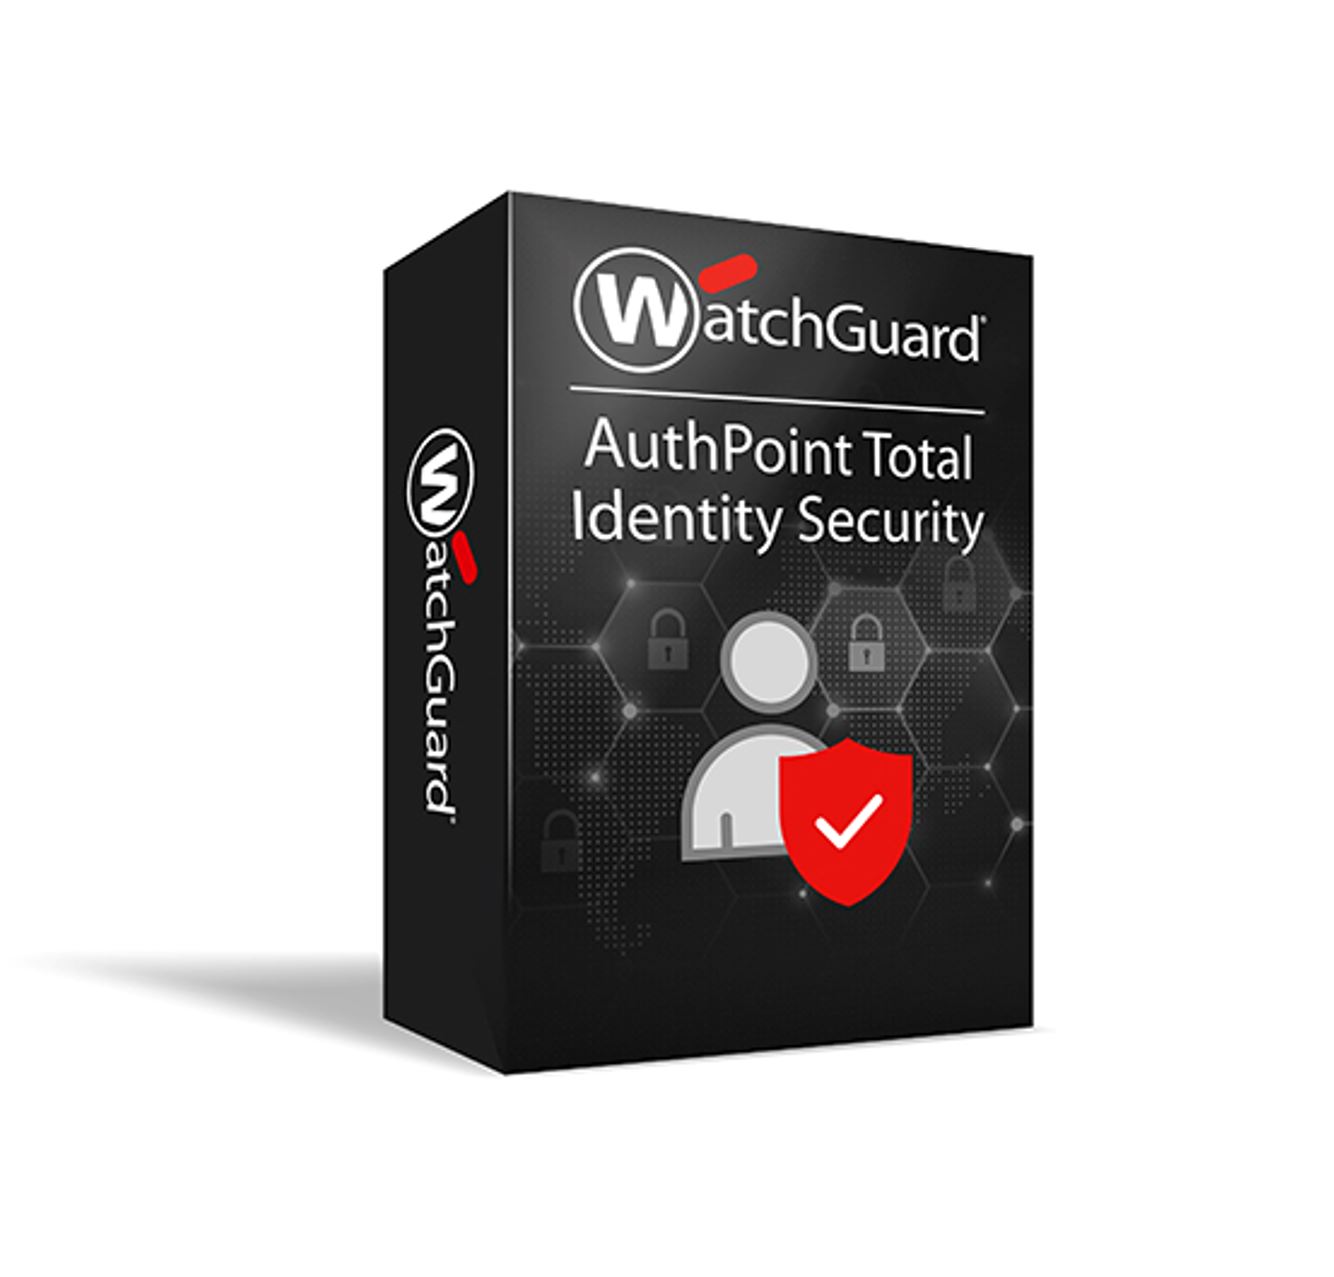 WatchGuard AuthPoint Total Identity Security  3 Year  1001 to 5000 users